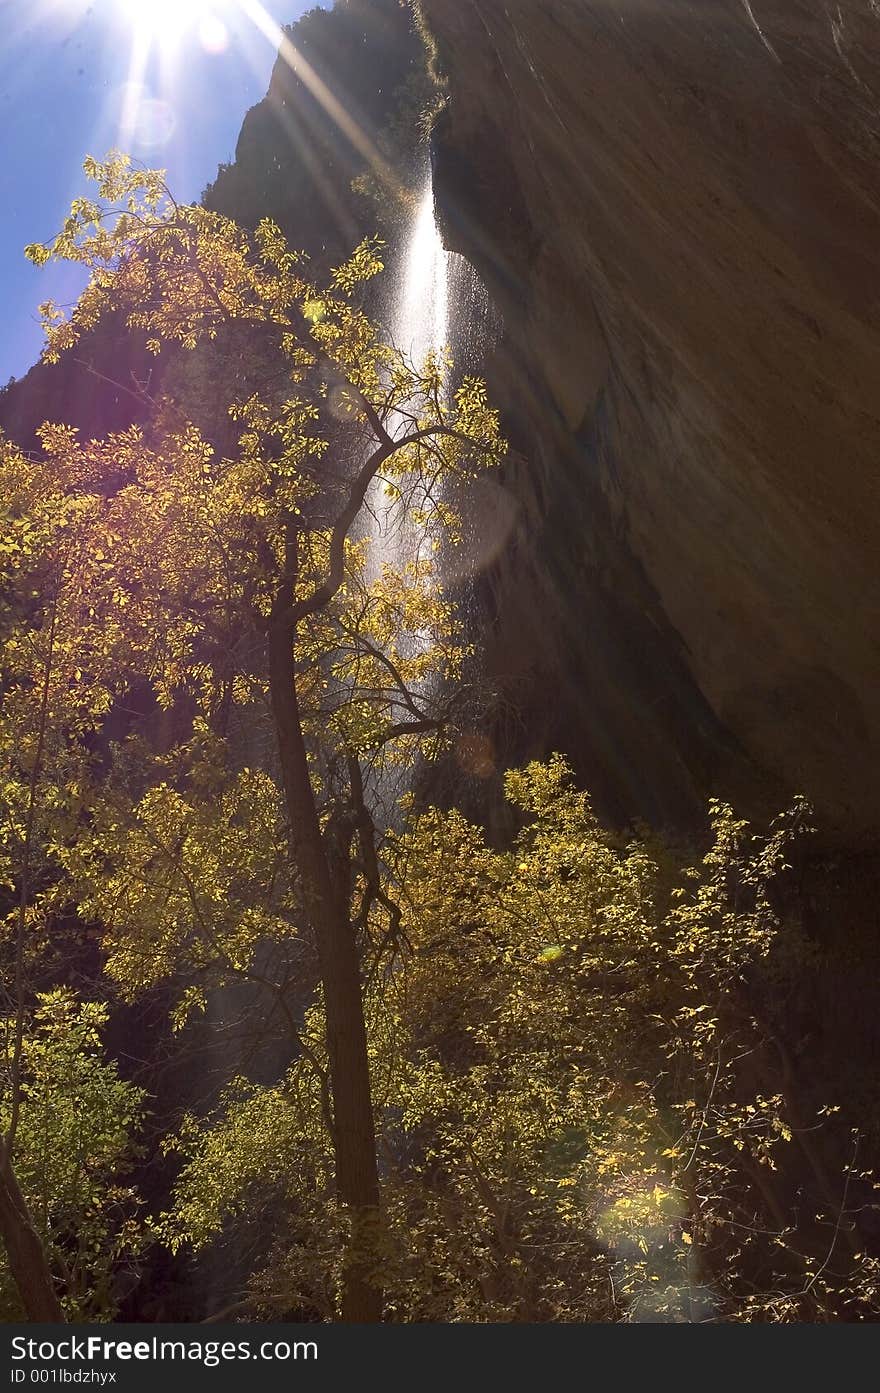 A waterfall in the middle of a canyon, with the sun shining bright up above. A waterfall in the middle of a canyon, with the sun shining bright up above